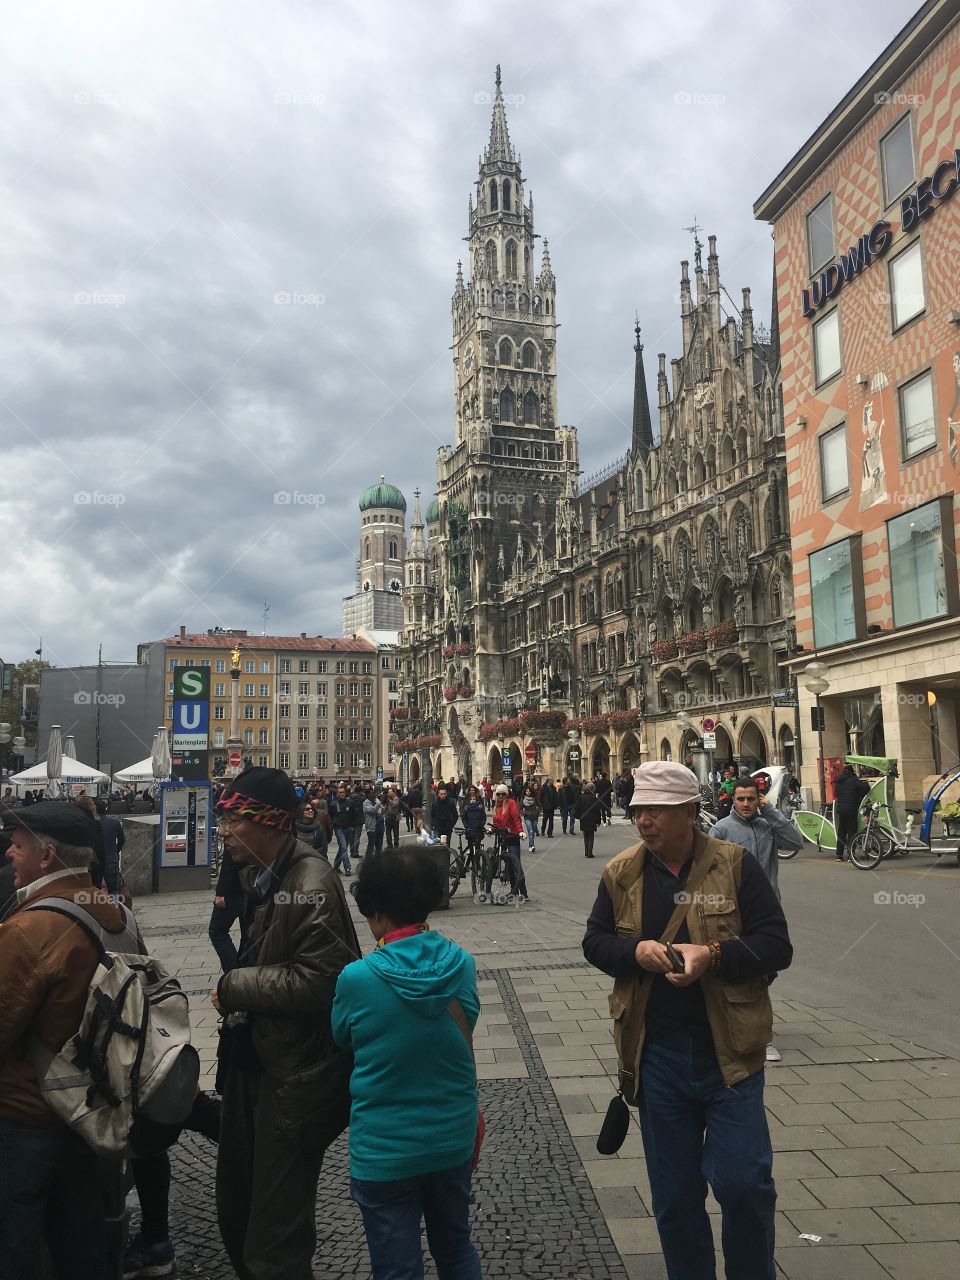 Crowded streets of Munich, Germany on a cloudy fall day. All the hustle and bustle of city life amongst ancient buildings 